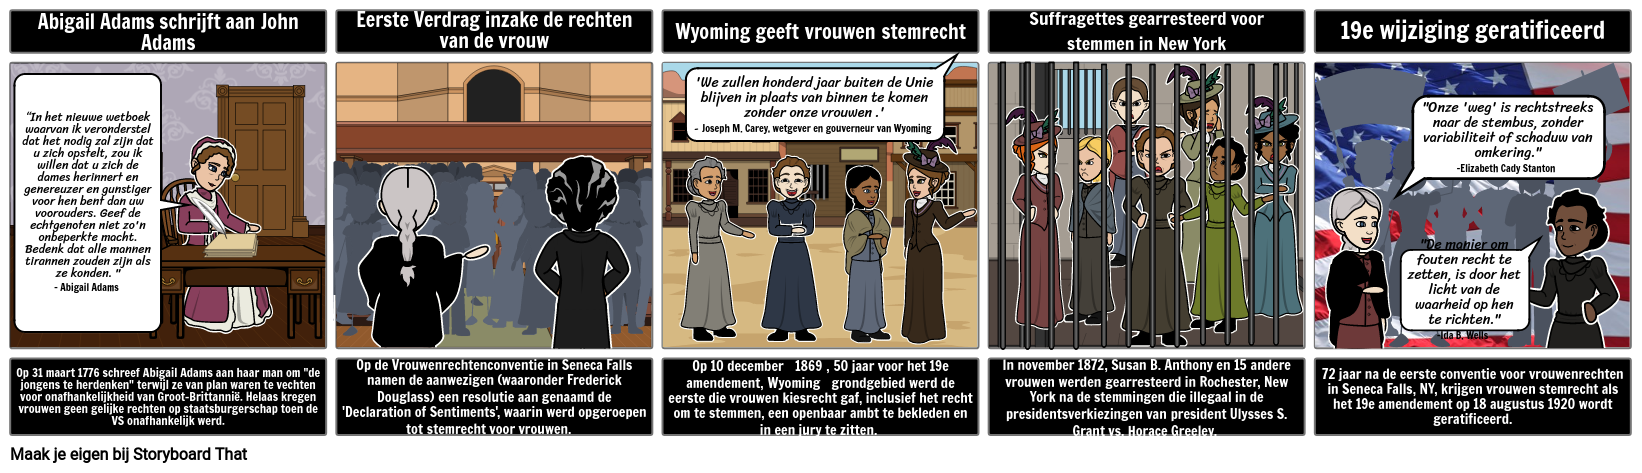 Road to the 19th Amendment - Vrouwenstemrecht, 4 Cell Storyboard